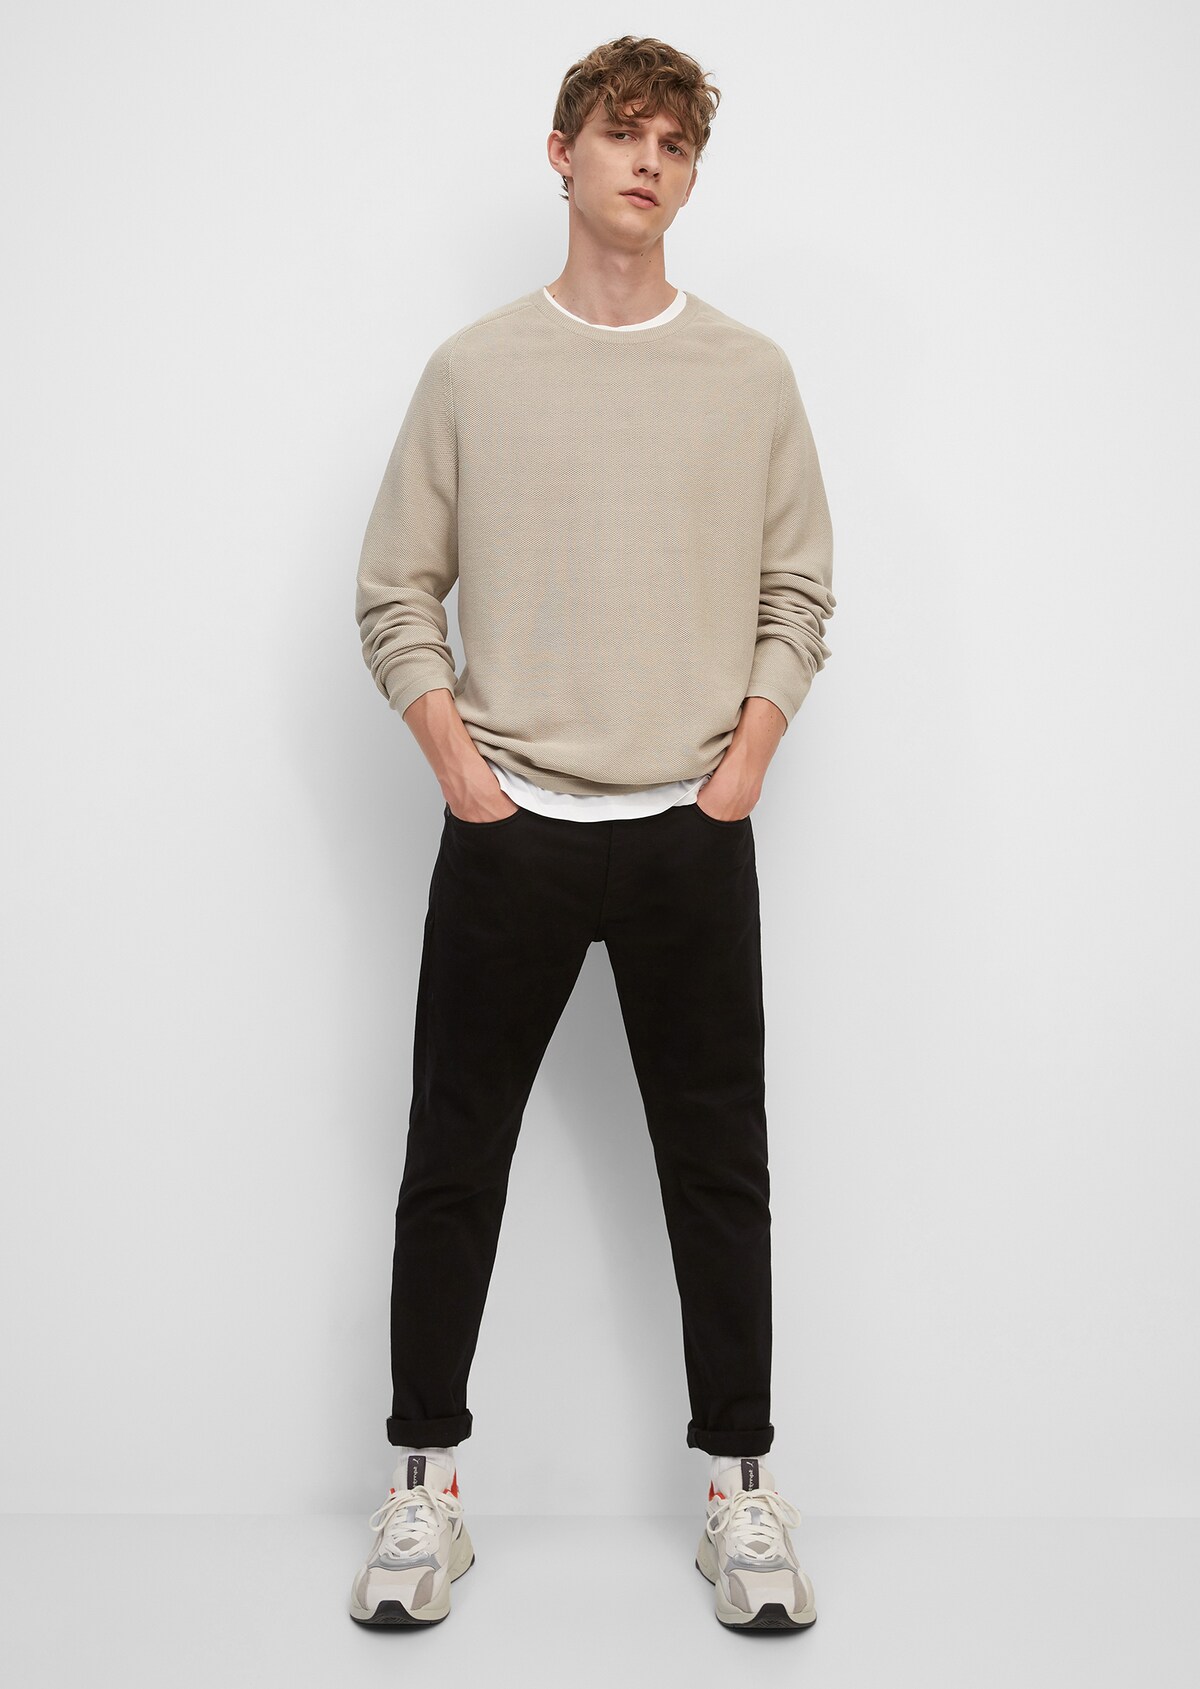 Jumpers, Pullovers & Knitwear for Men | New Collection | MARC O’POLO ...